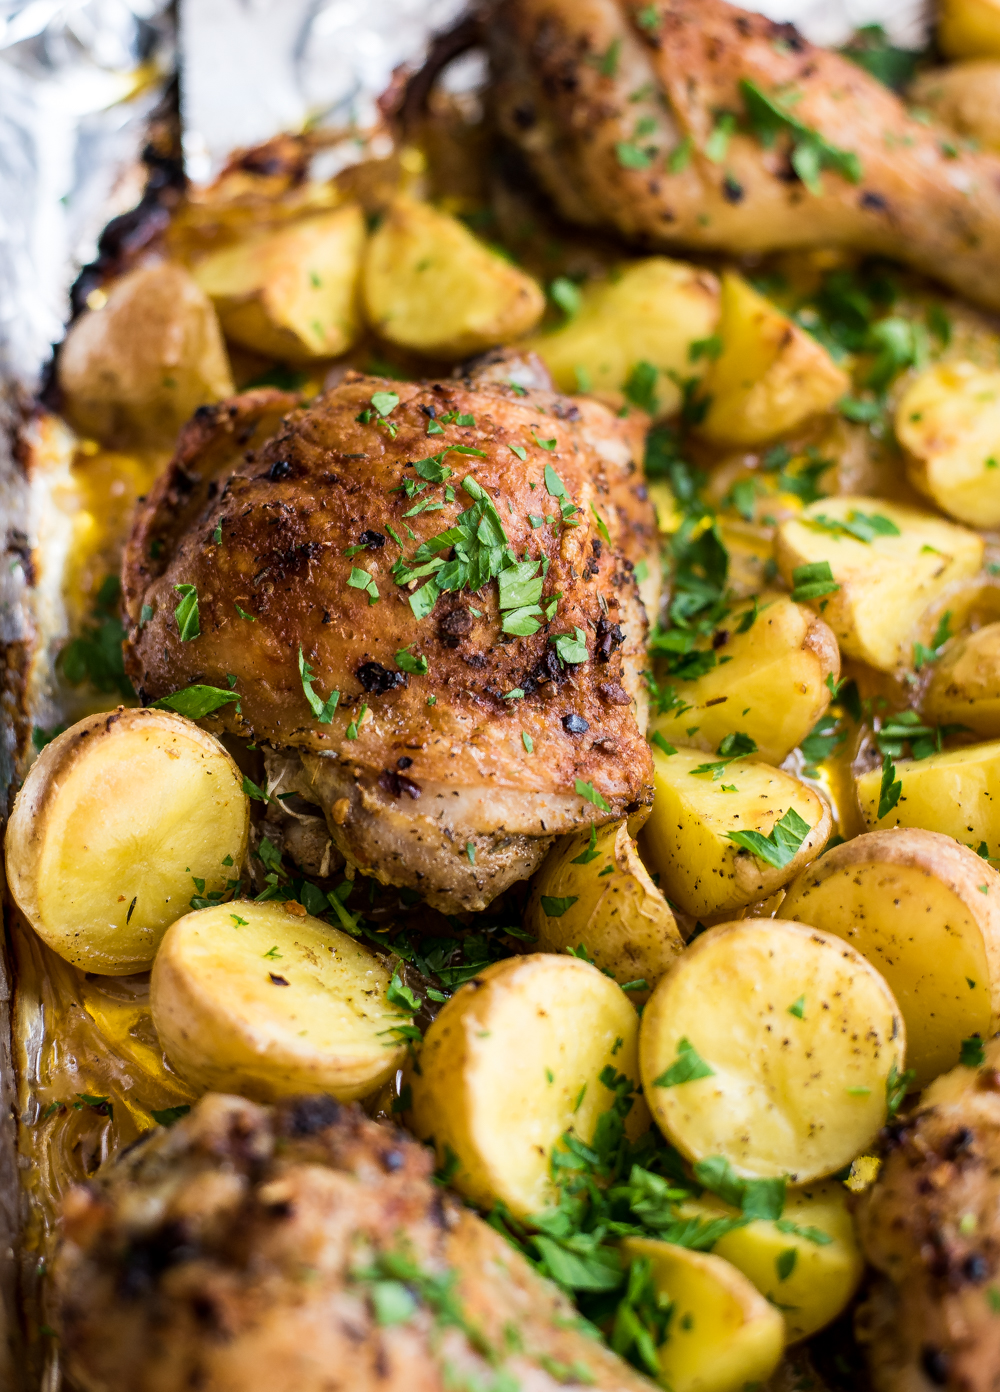 Spicy garlic chicken and potatoes sheet pan dinner is the perfect quick weeknight meal that's simple to make and loaded with flavor!